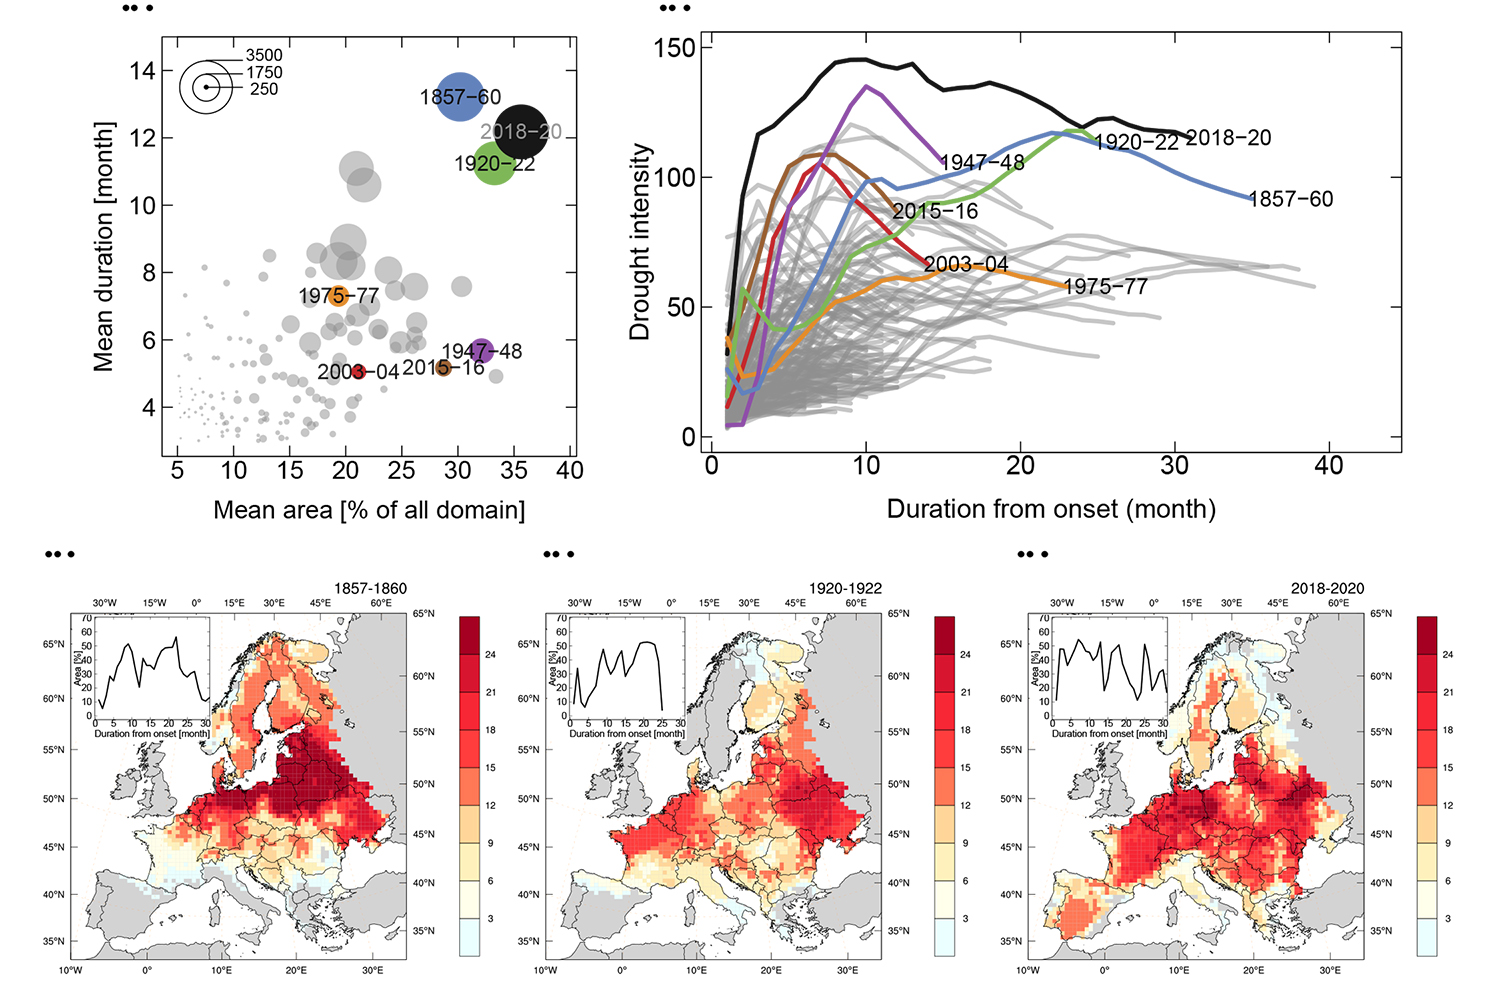 Characterization of major drought events in Europe over the past 250 years. Image: UFZ